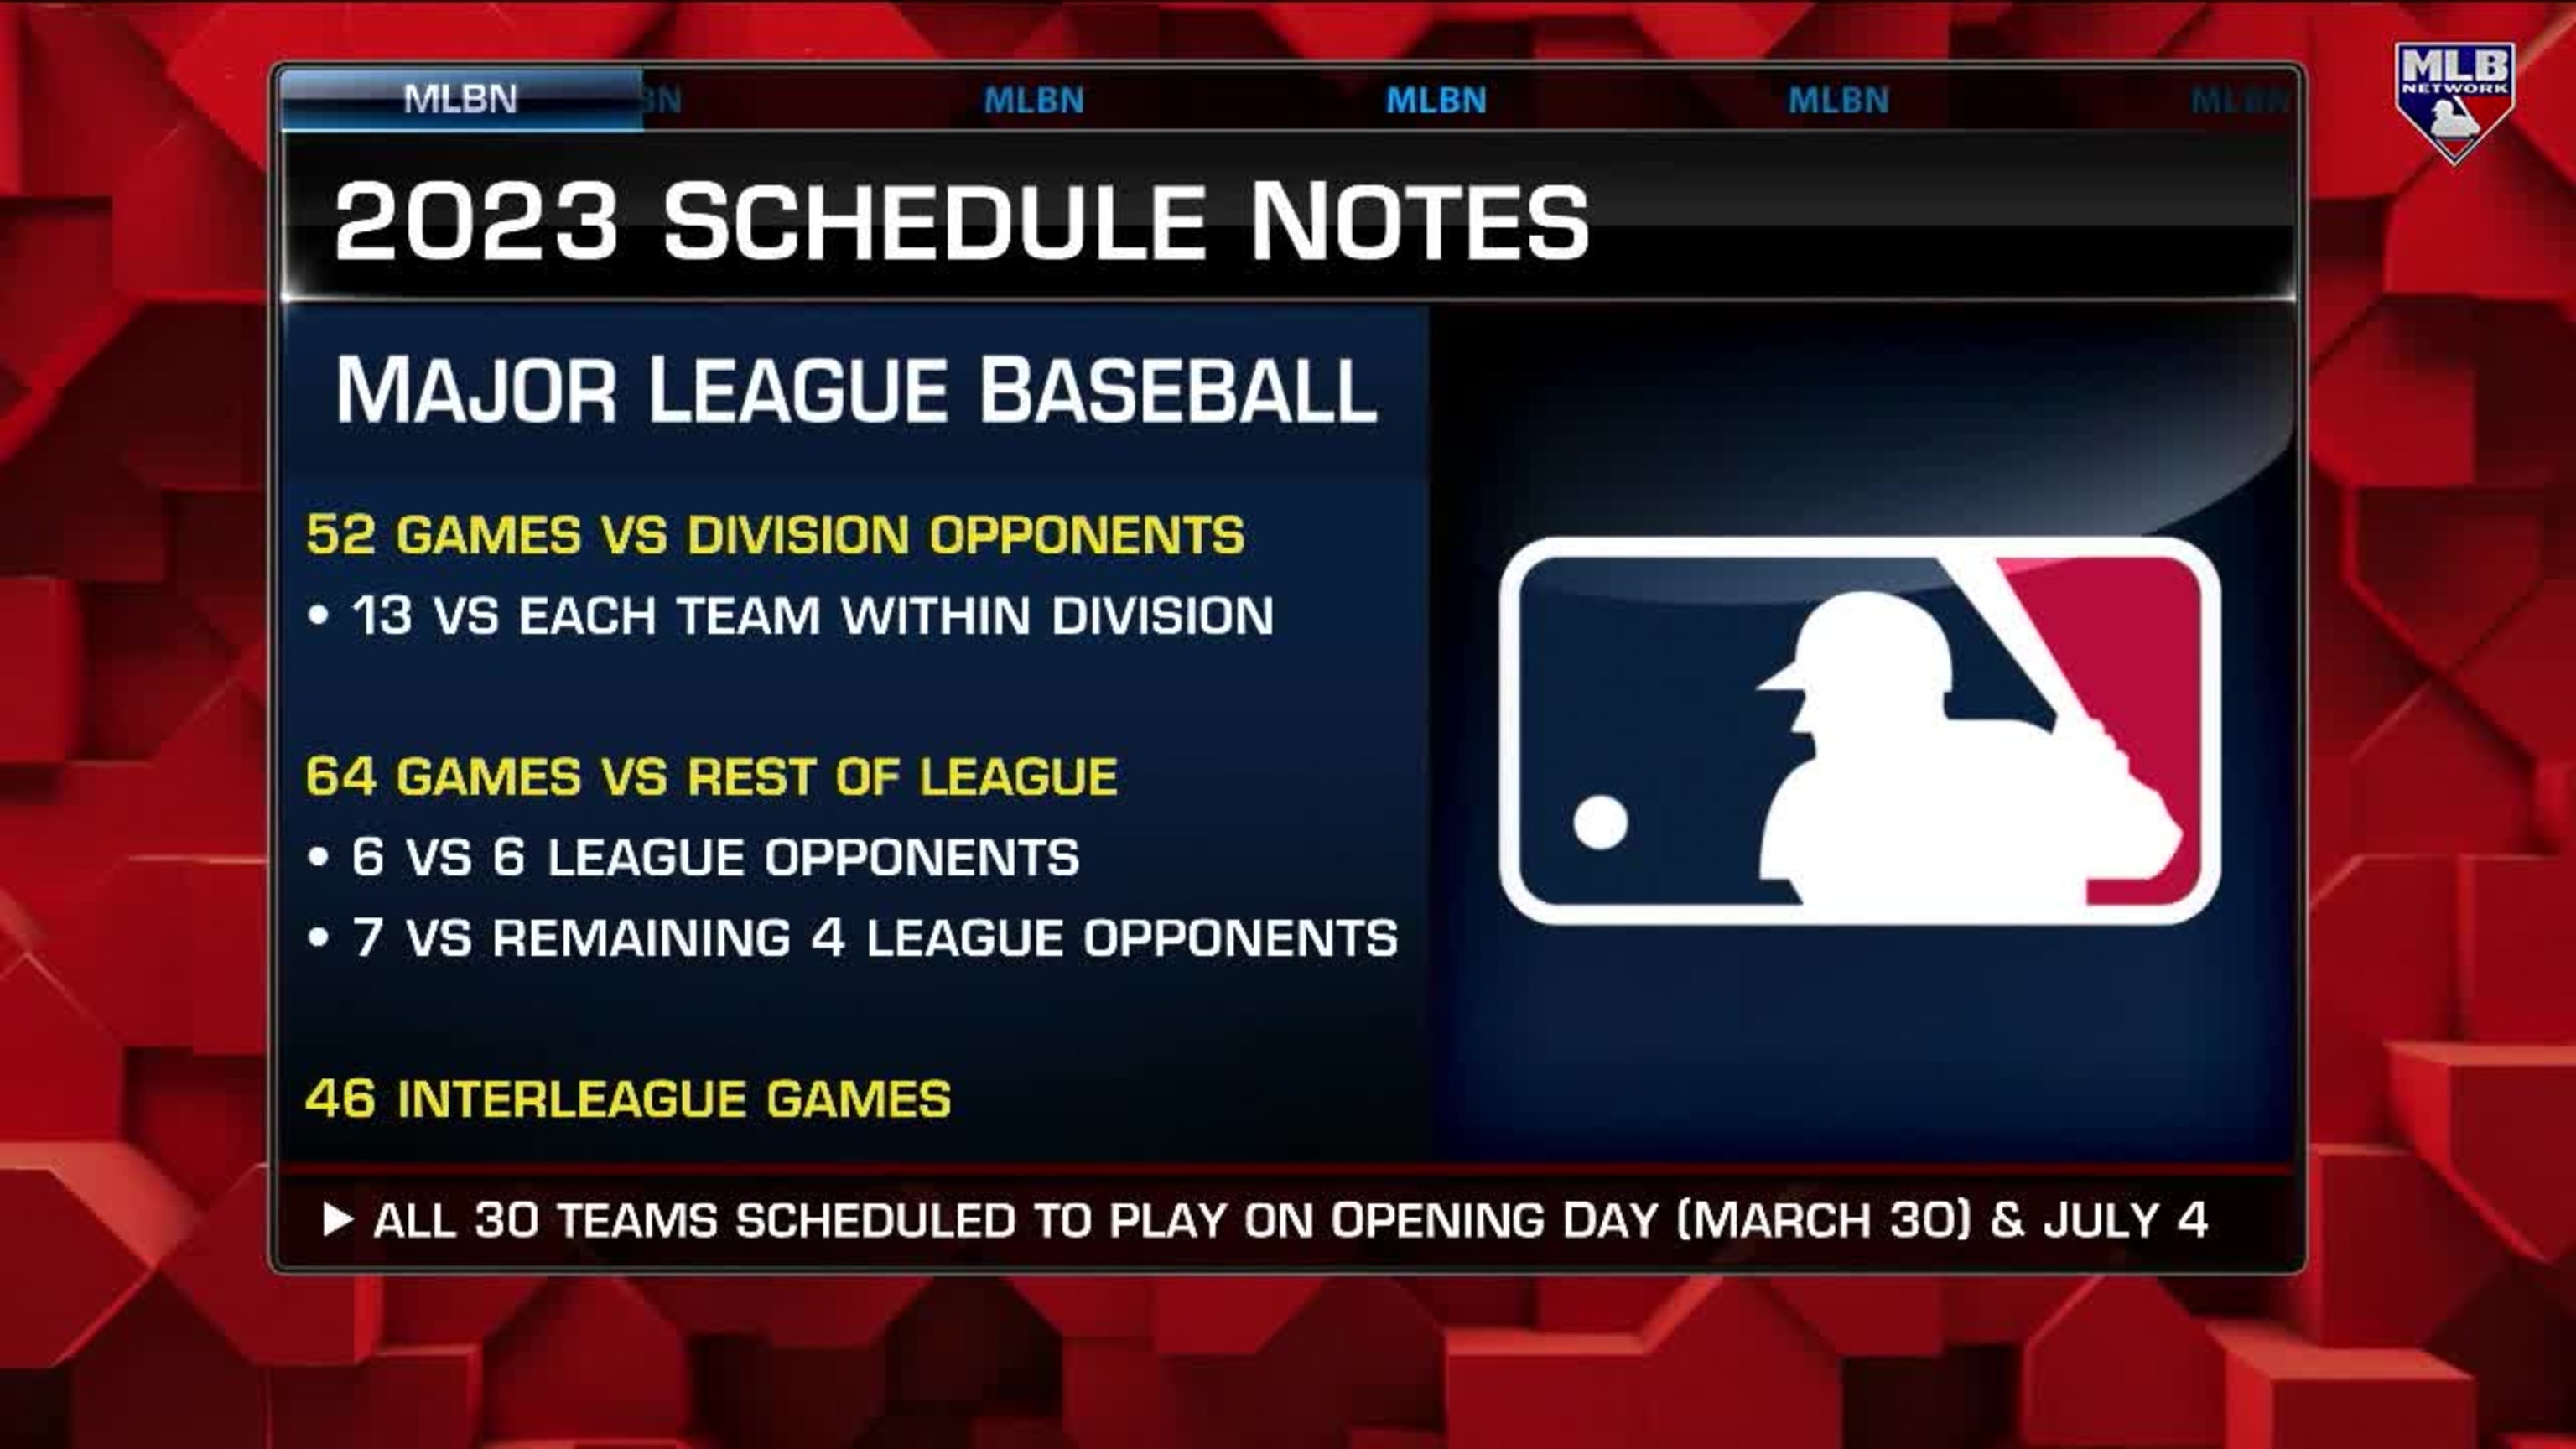 MLB News: MLB Schedule: Day, time and channel where you can watch the games